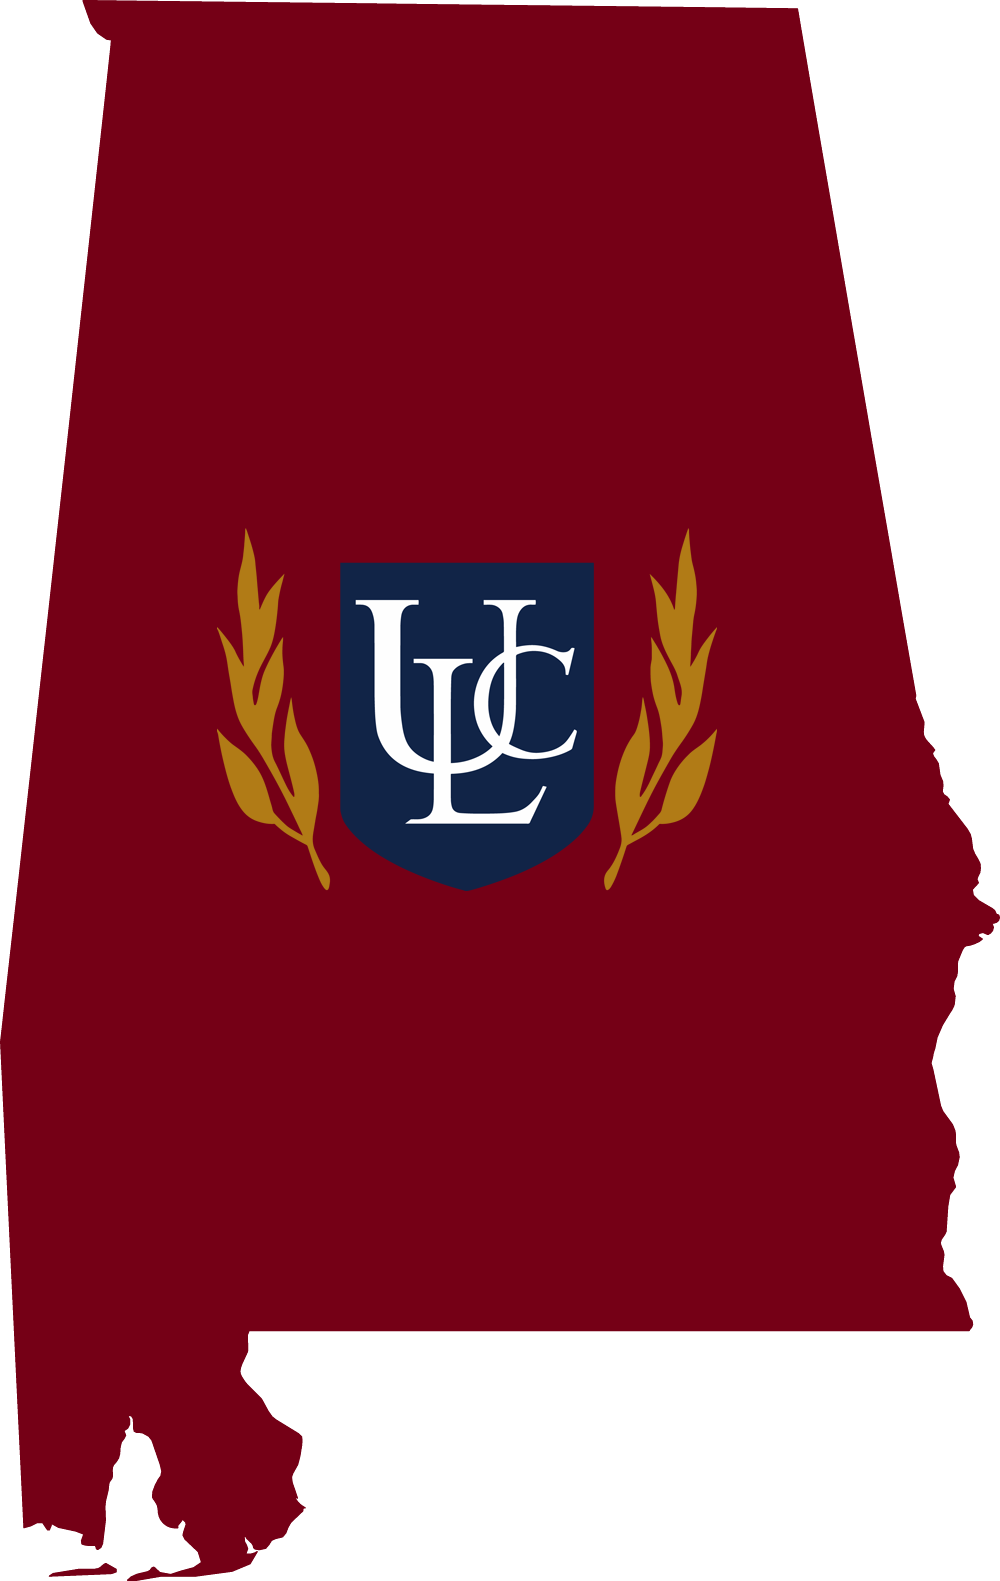 An outline of Alabama with the ULC logo